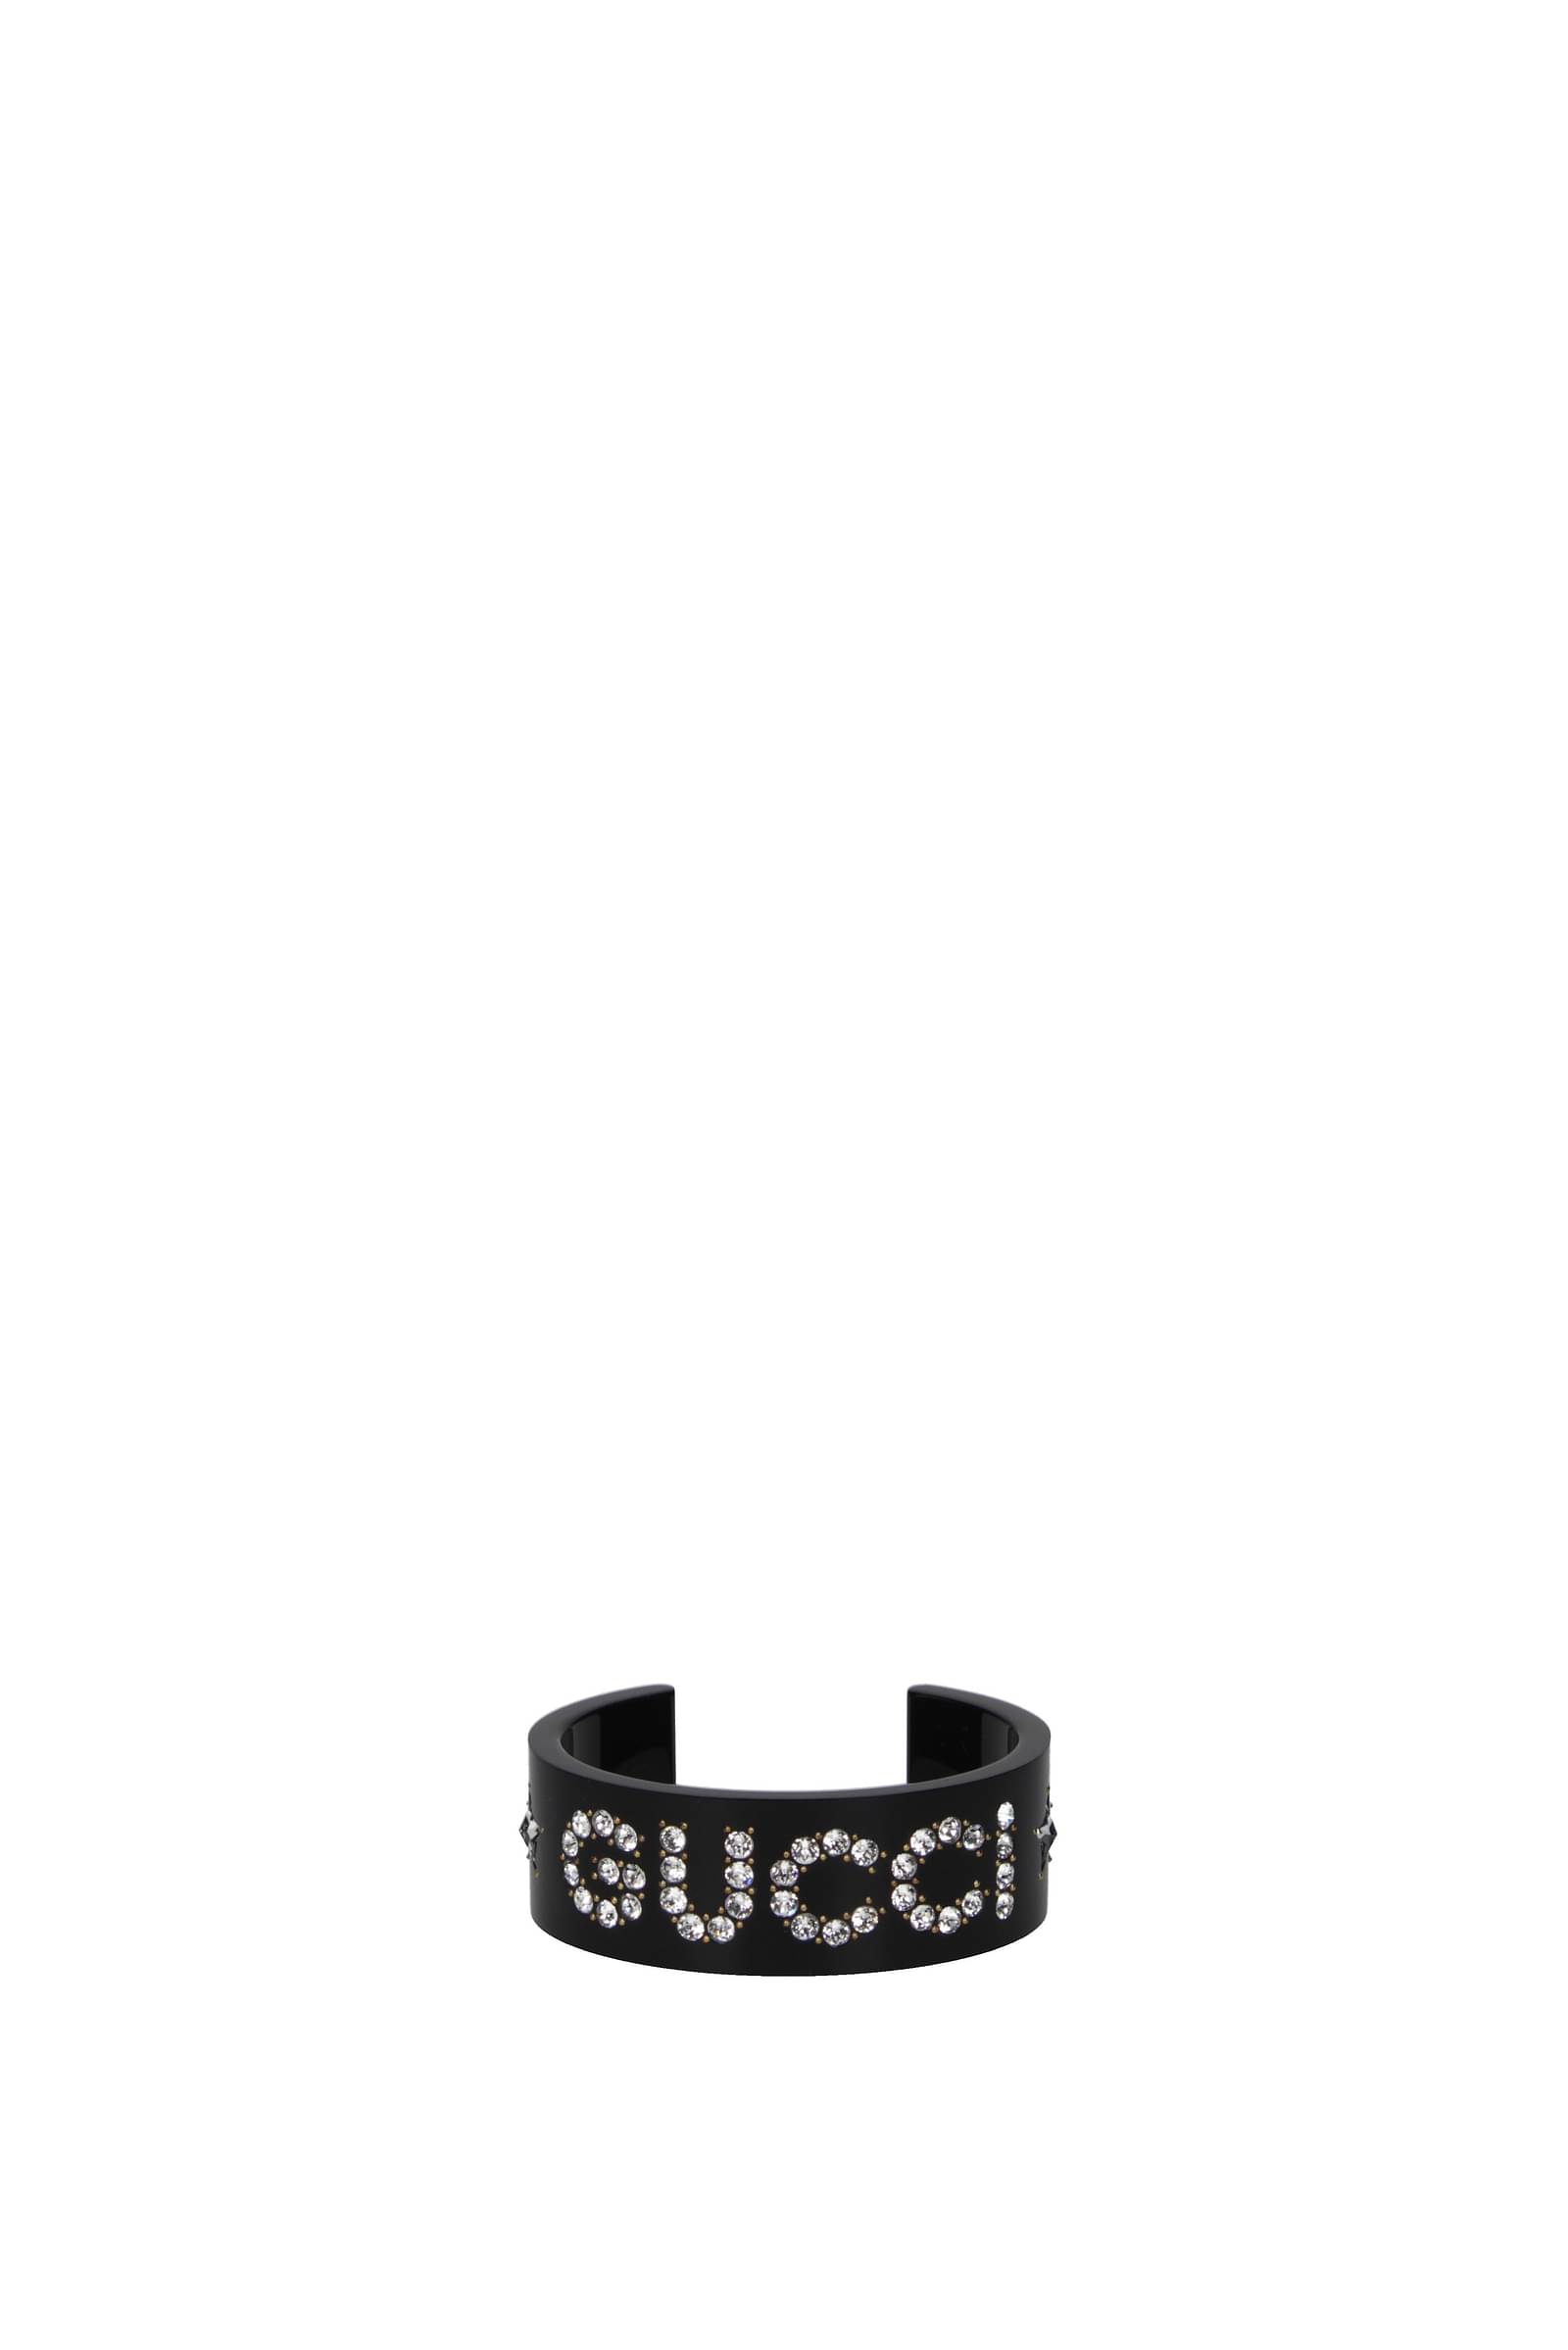 All About the New Gucci Link Bracelet - Seven Rocks